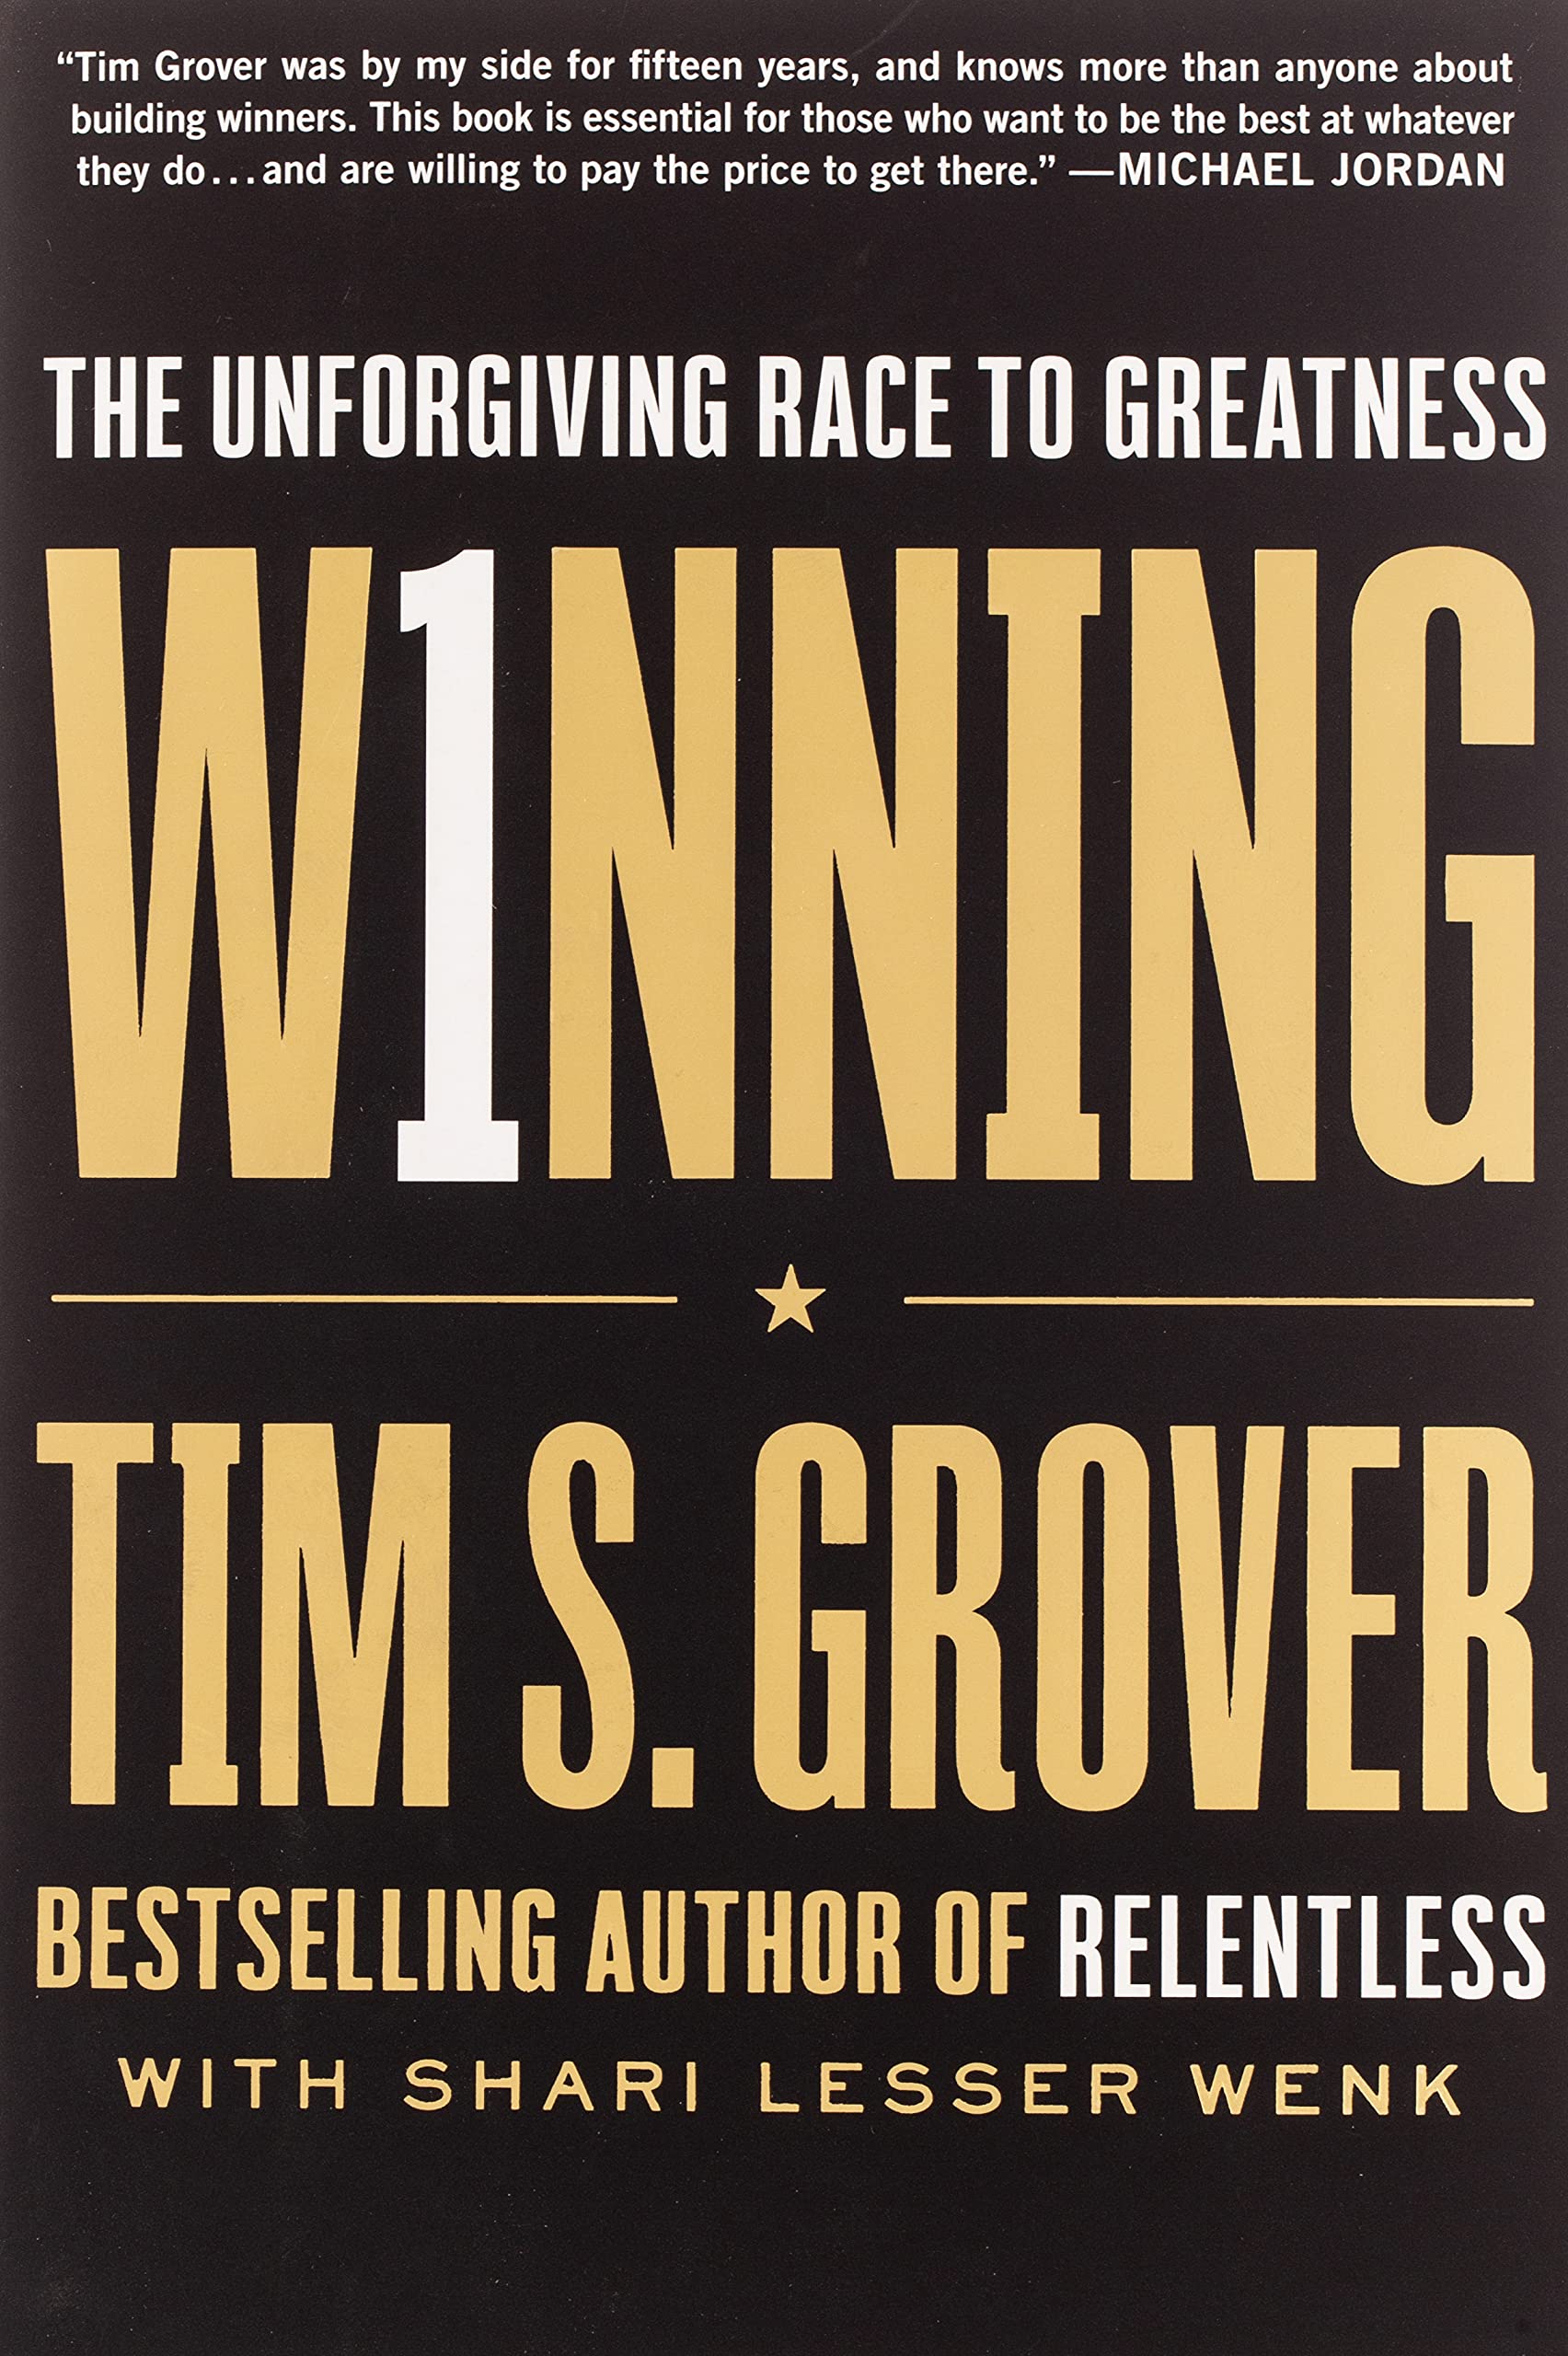 Winning: The Unforgiving Race to Greatness Hardcover by Tim S. Grover (Author), Shari Wenk